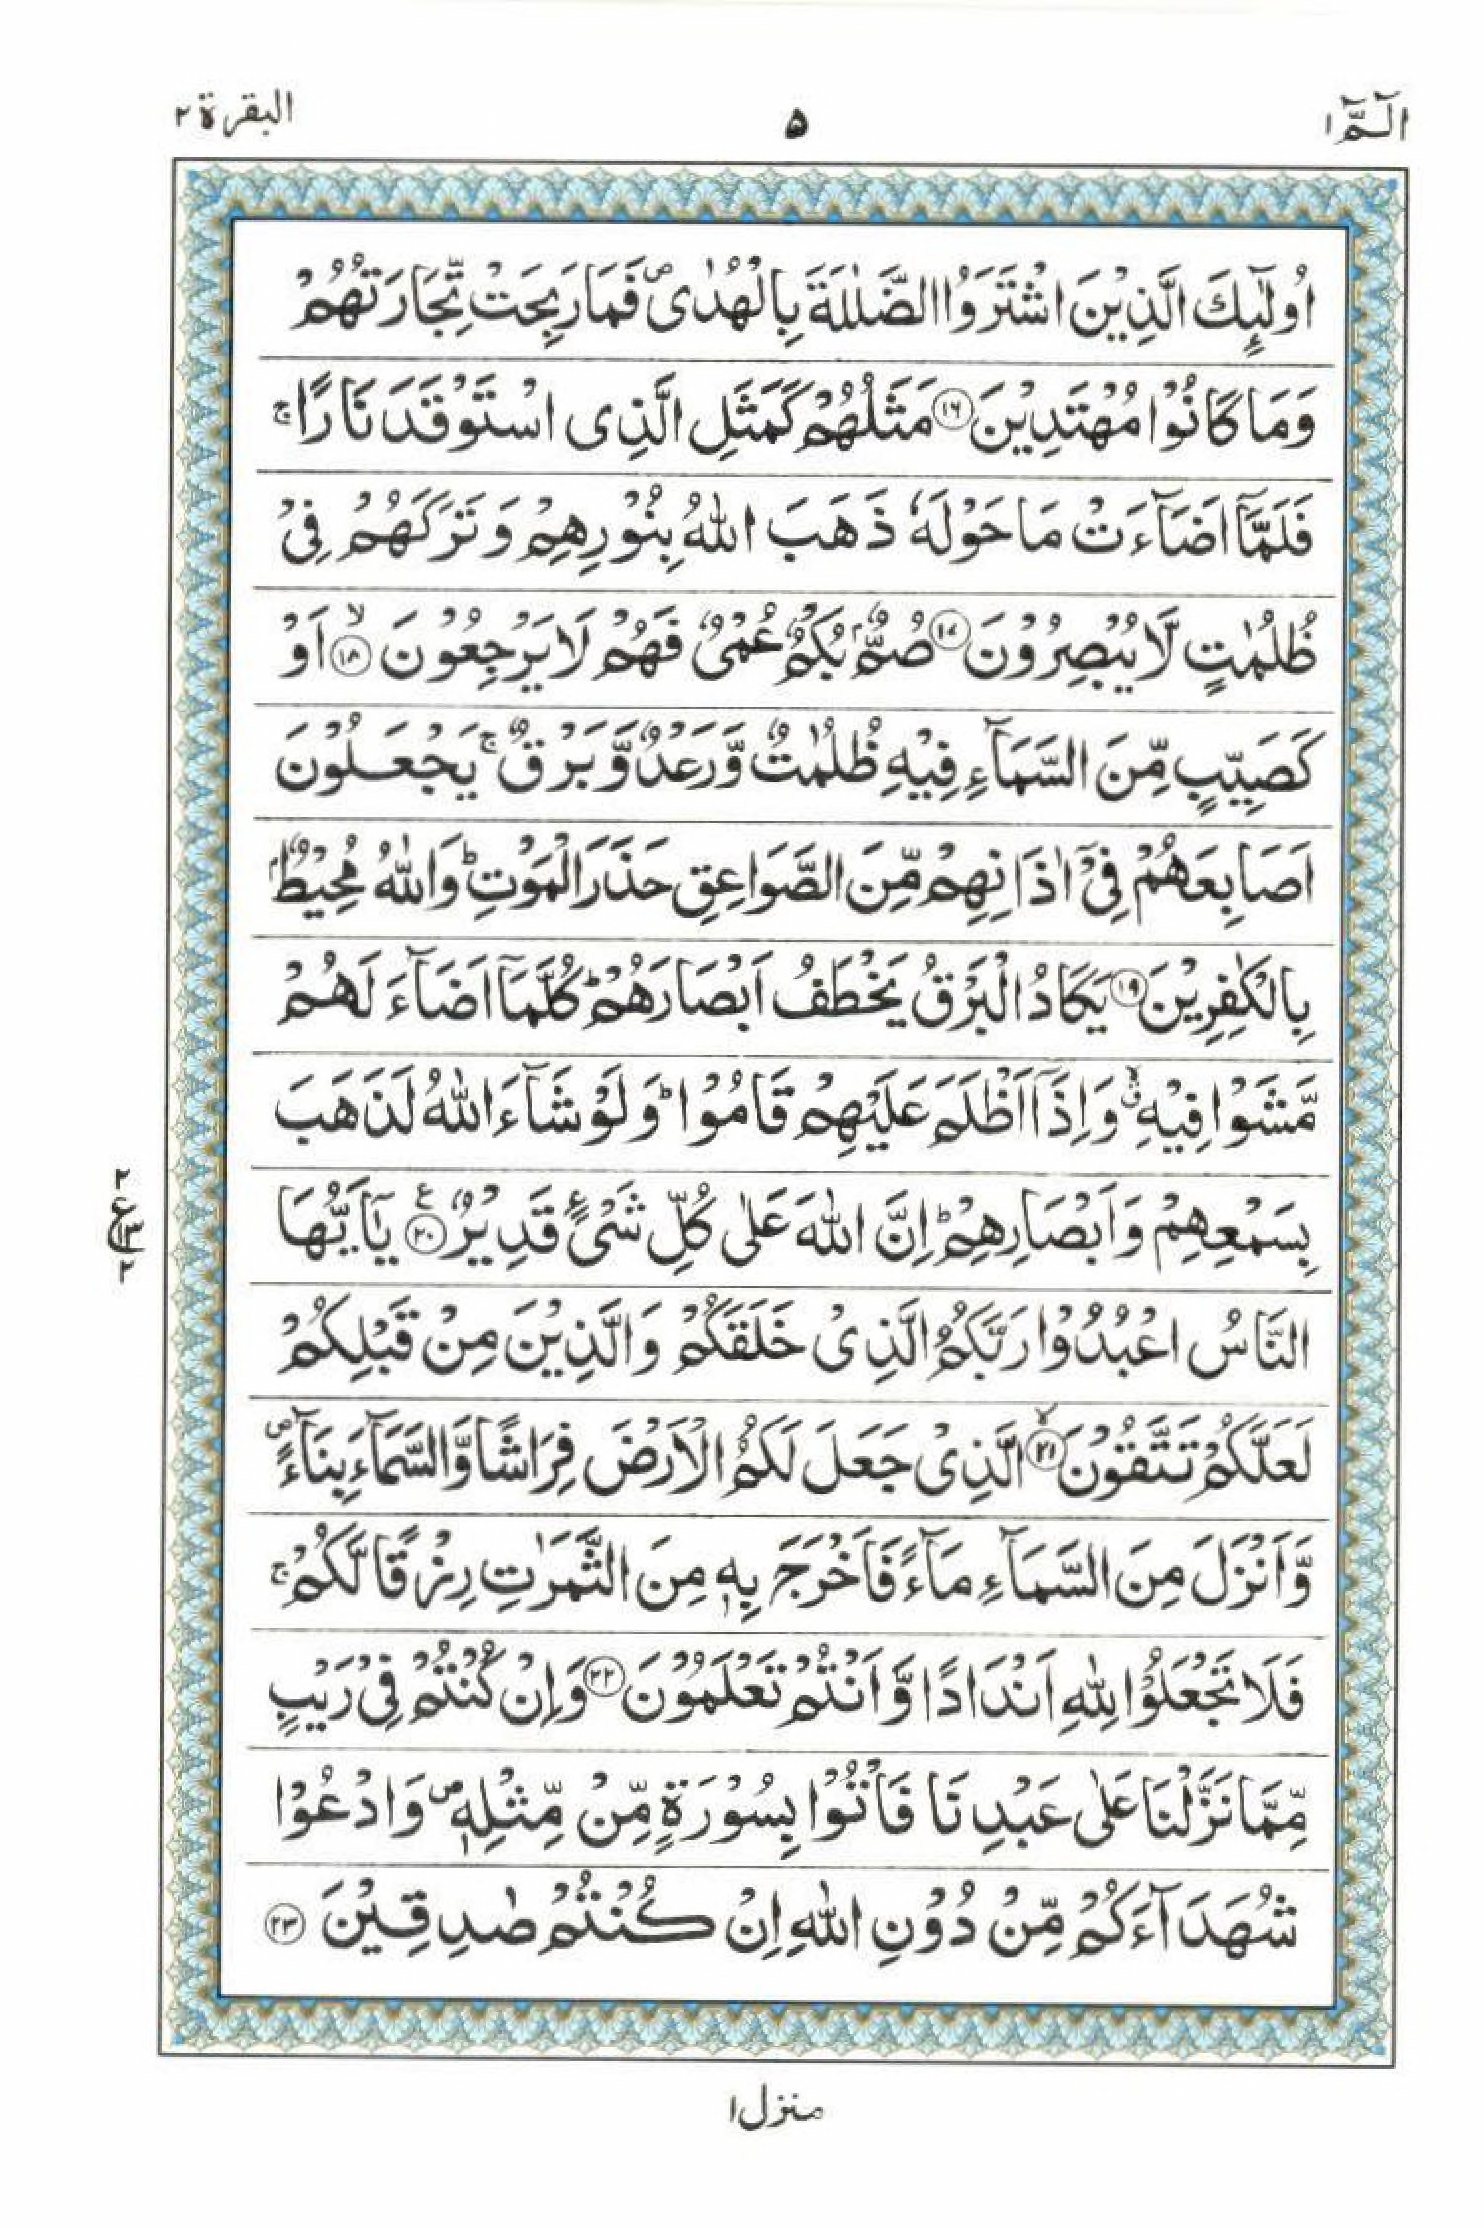 Read 15 Lines Quran, Part / Chapter / Siparah 1 Page 5